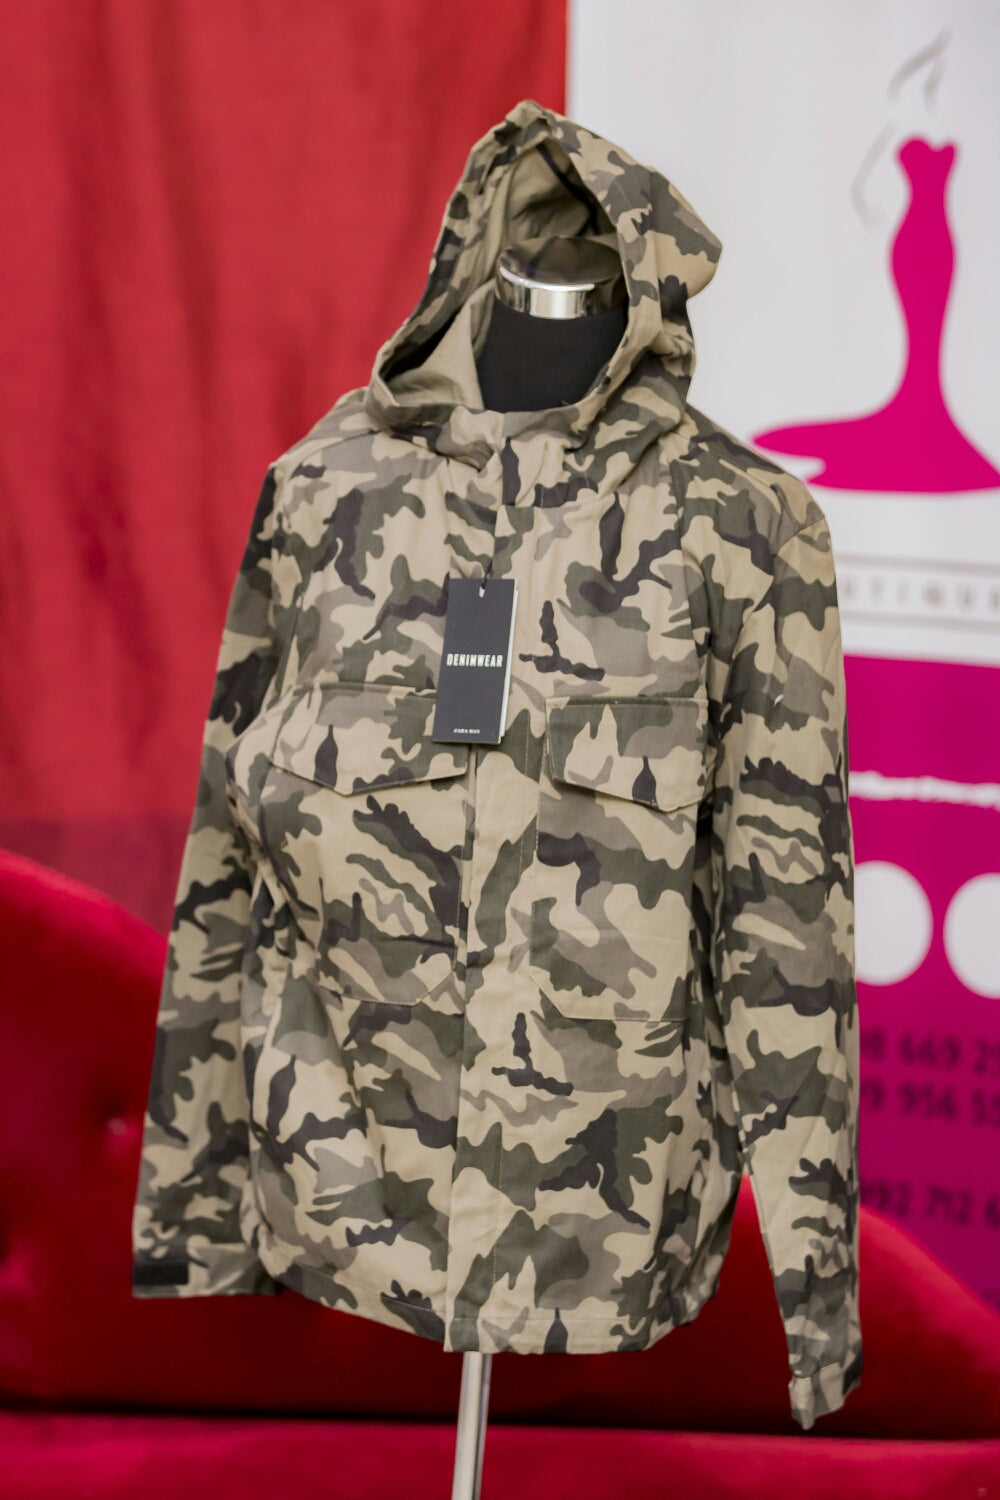 Camouflaged Top With Hood